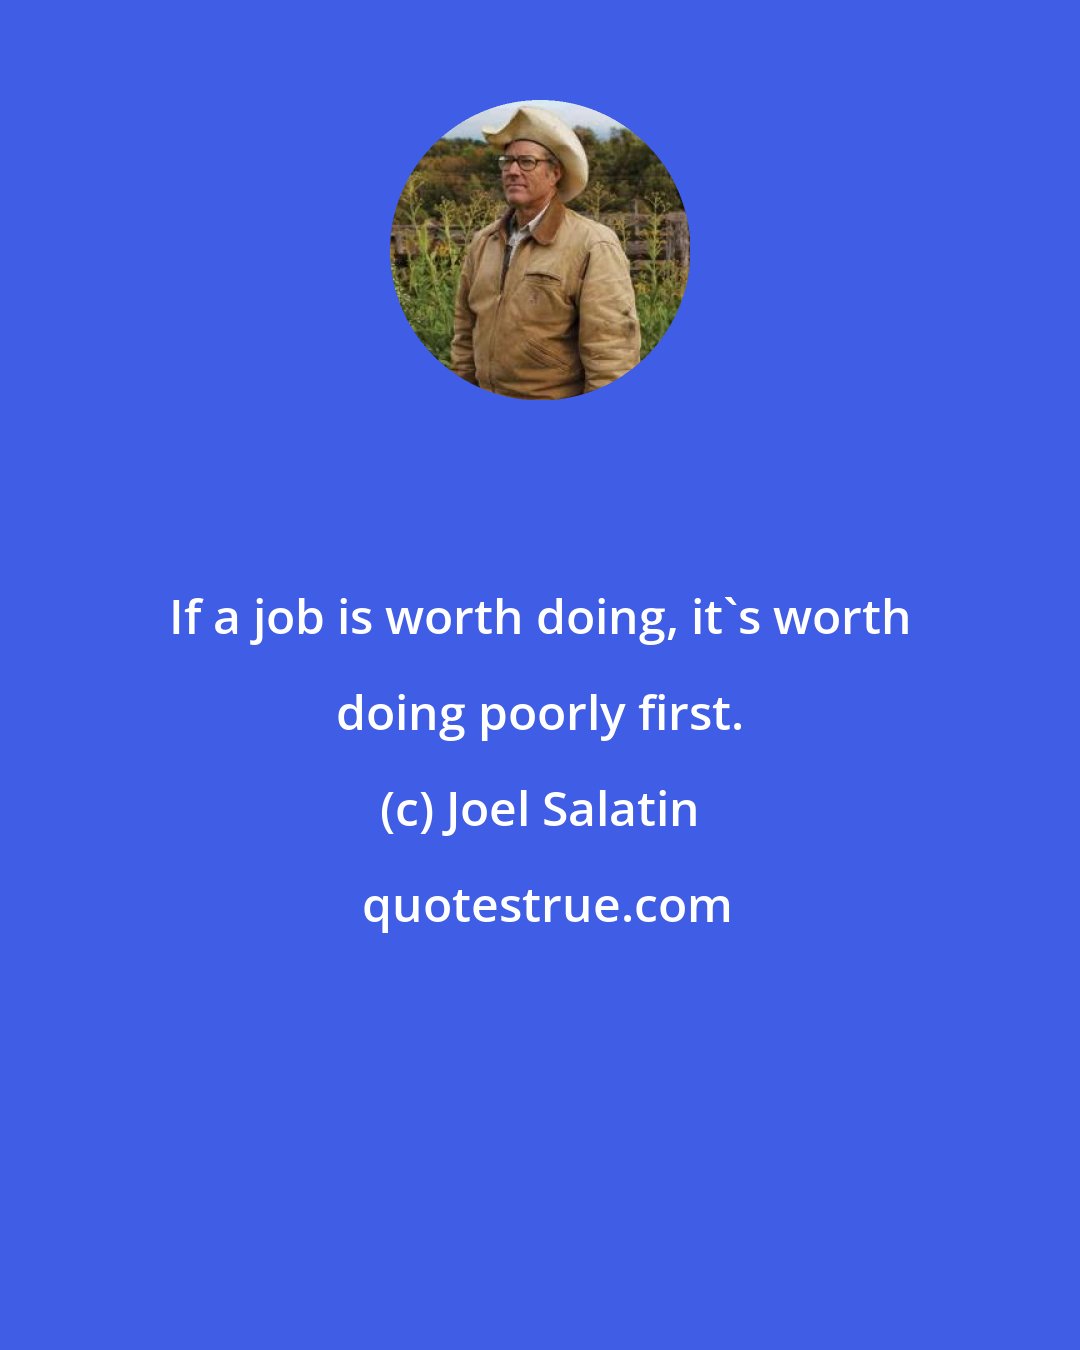 Joel Salatin: If a job is worth doing, it's worth doing poorly first.